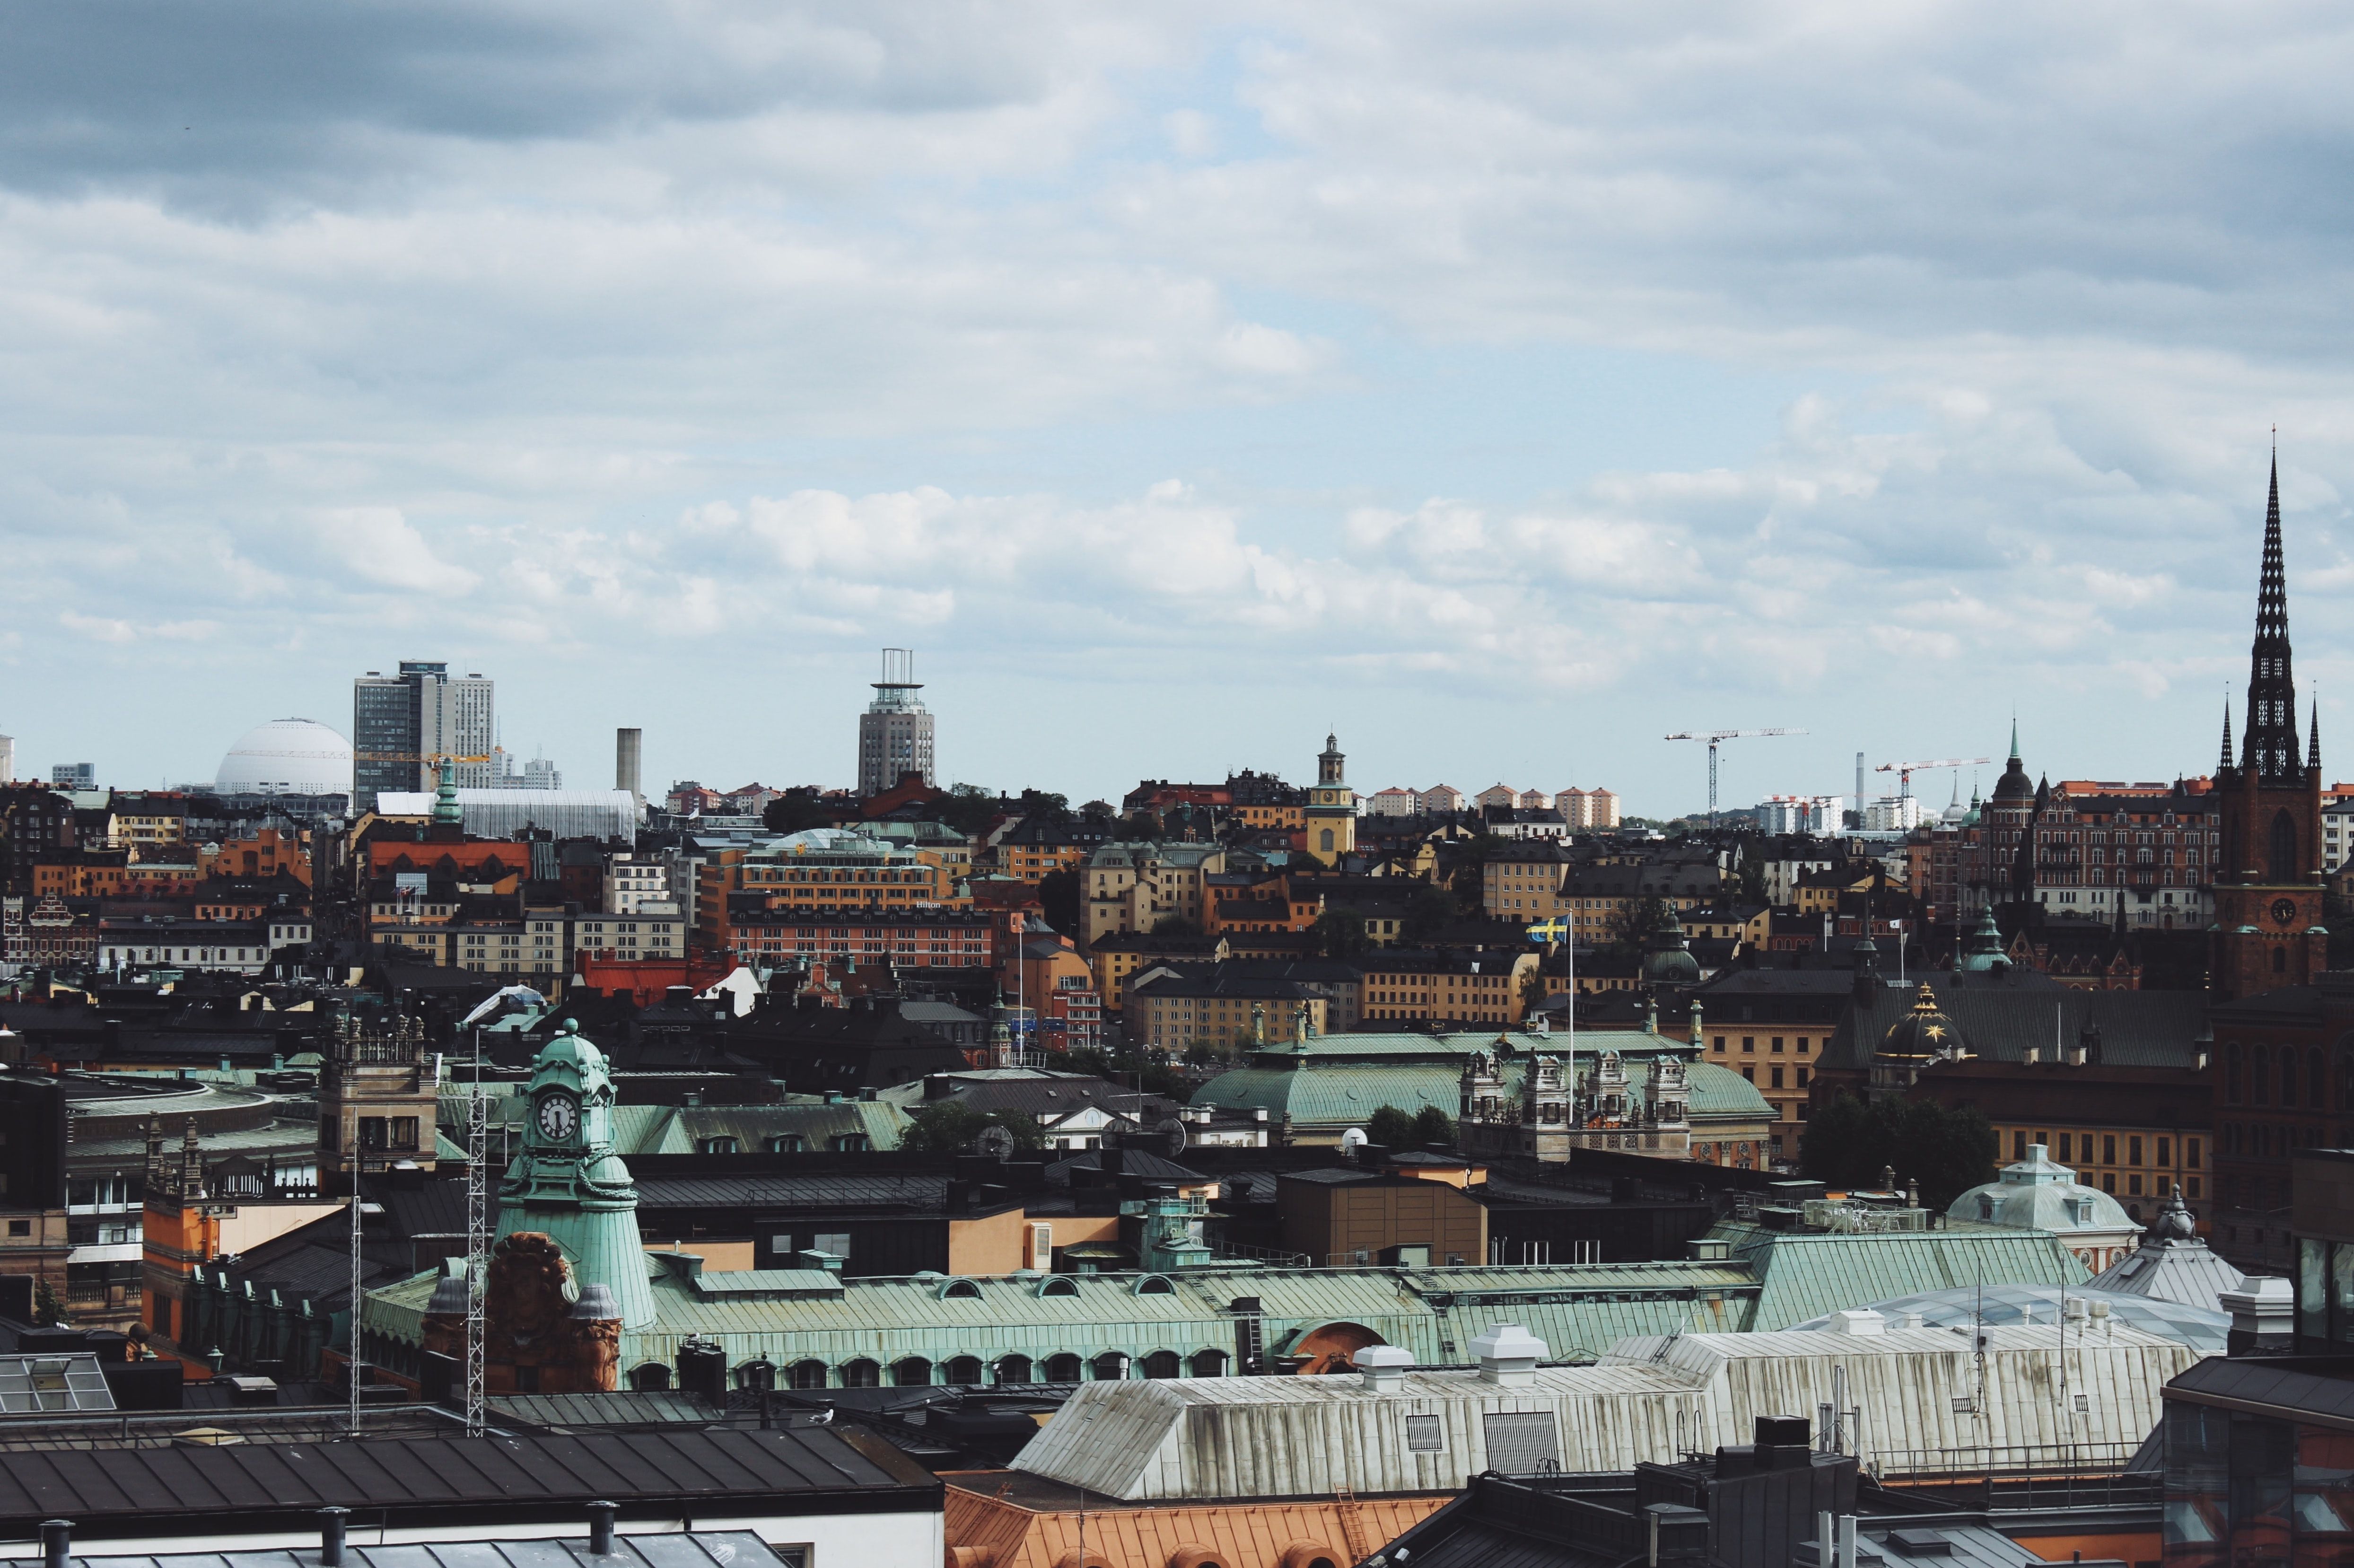 city skyline of stockholm, commonly known as sweden's silicon valley